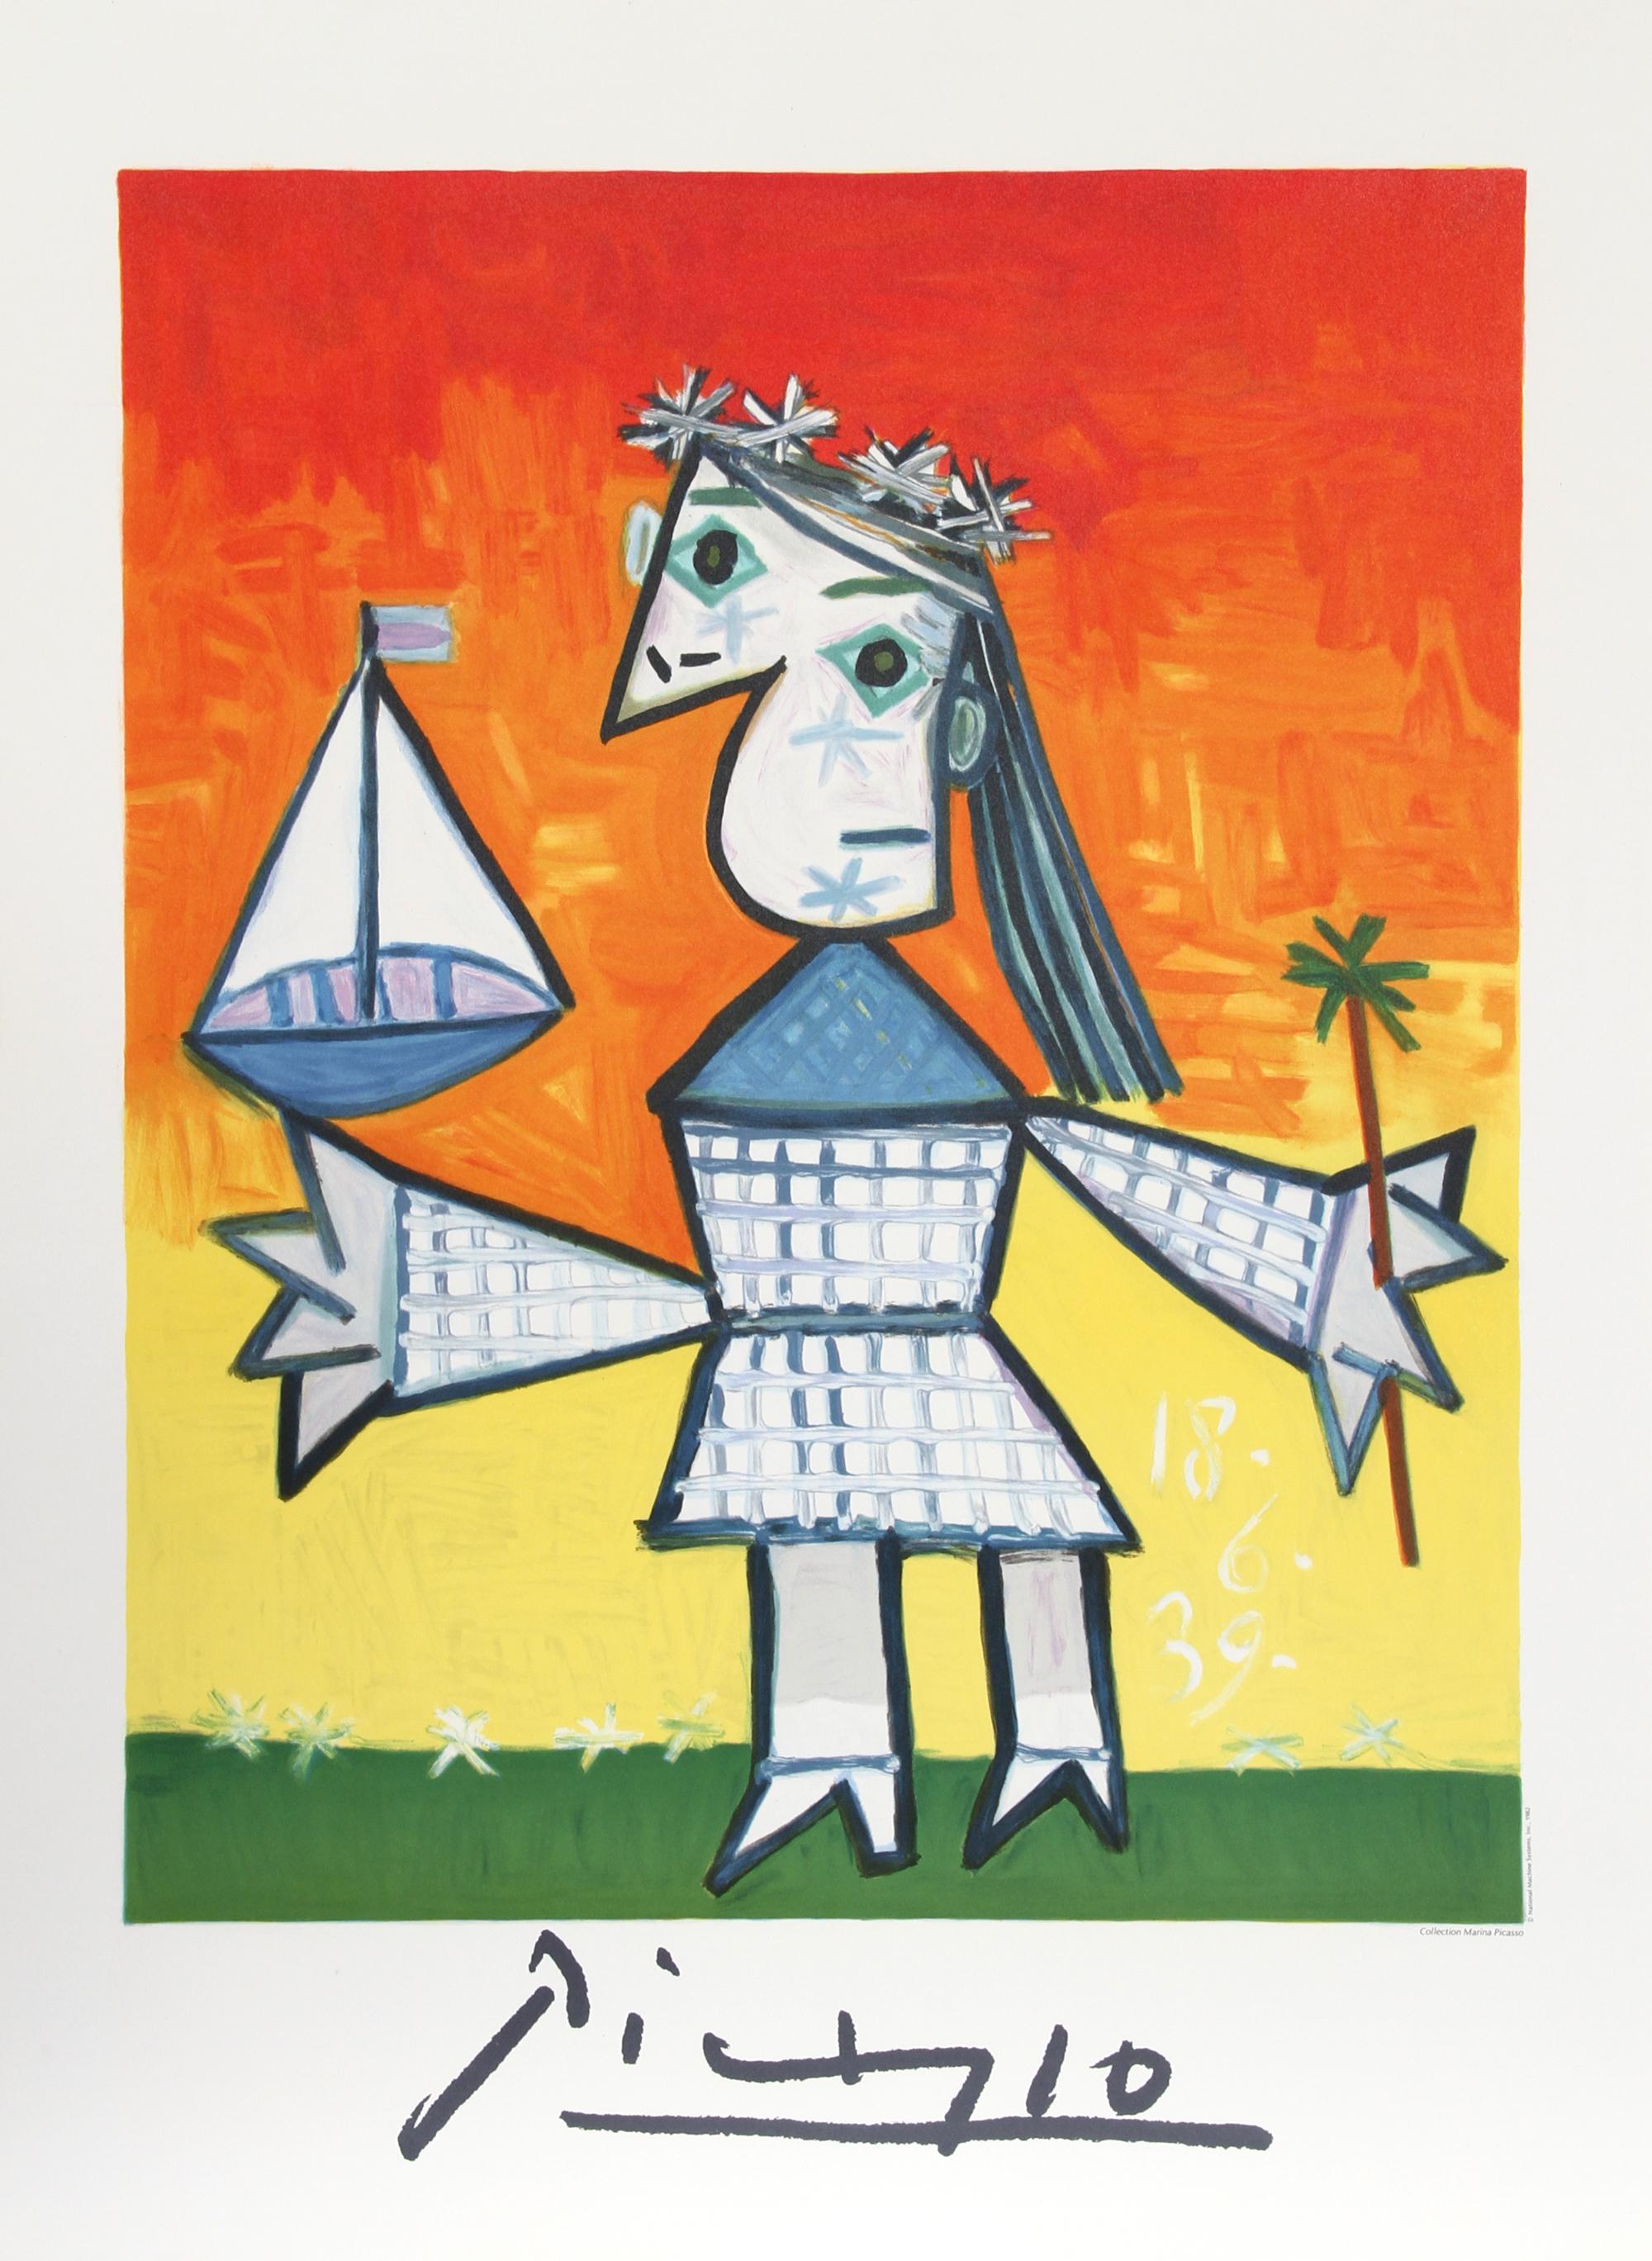 An original limited edition lithograph poster after the famous painting by Pablo Picasso "Fillette Couronee au Bateau". The oil painting was completed in 1939. In the 1970’s after Picasso’s death, Marina Picasso, his granddaughter, authorized the